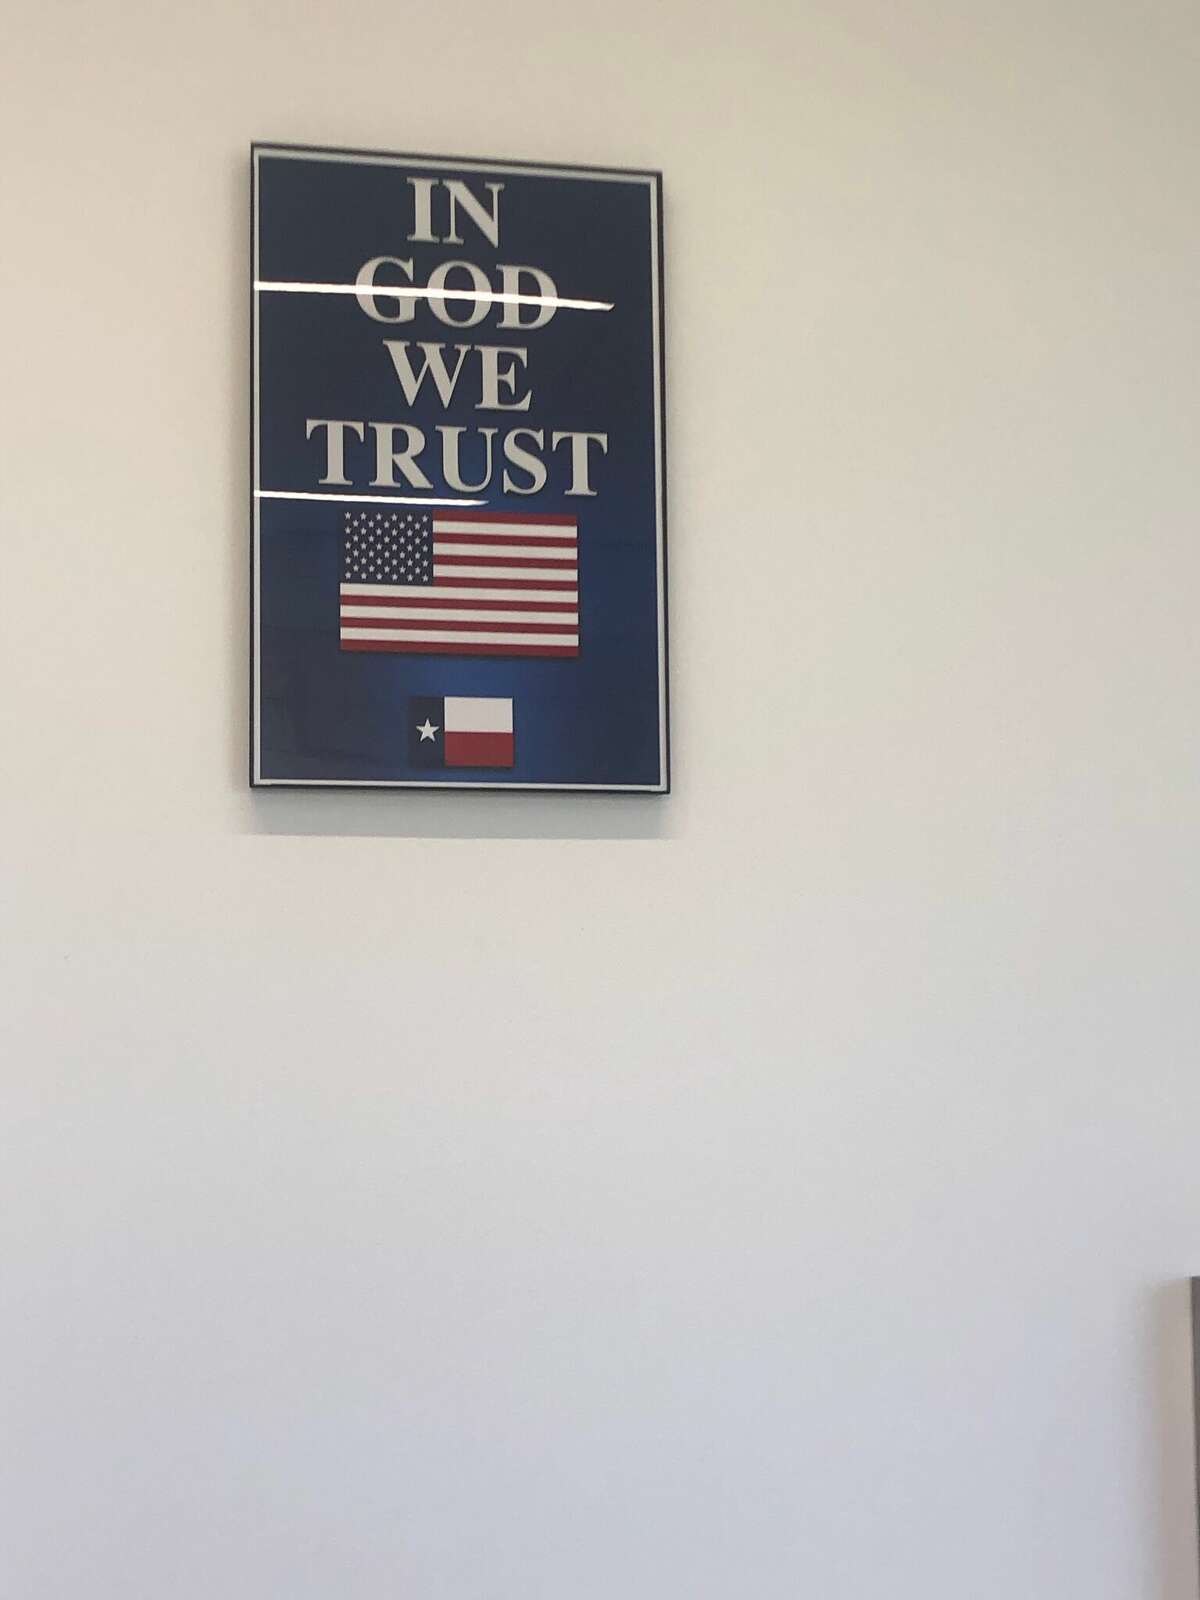 Patriot Mobile, a far-right Texas-based cell phone company on a mission to “bring God back” to public schools, donated 73 “In God We Trust” signs to Katy ISD.